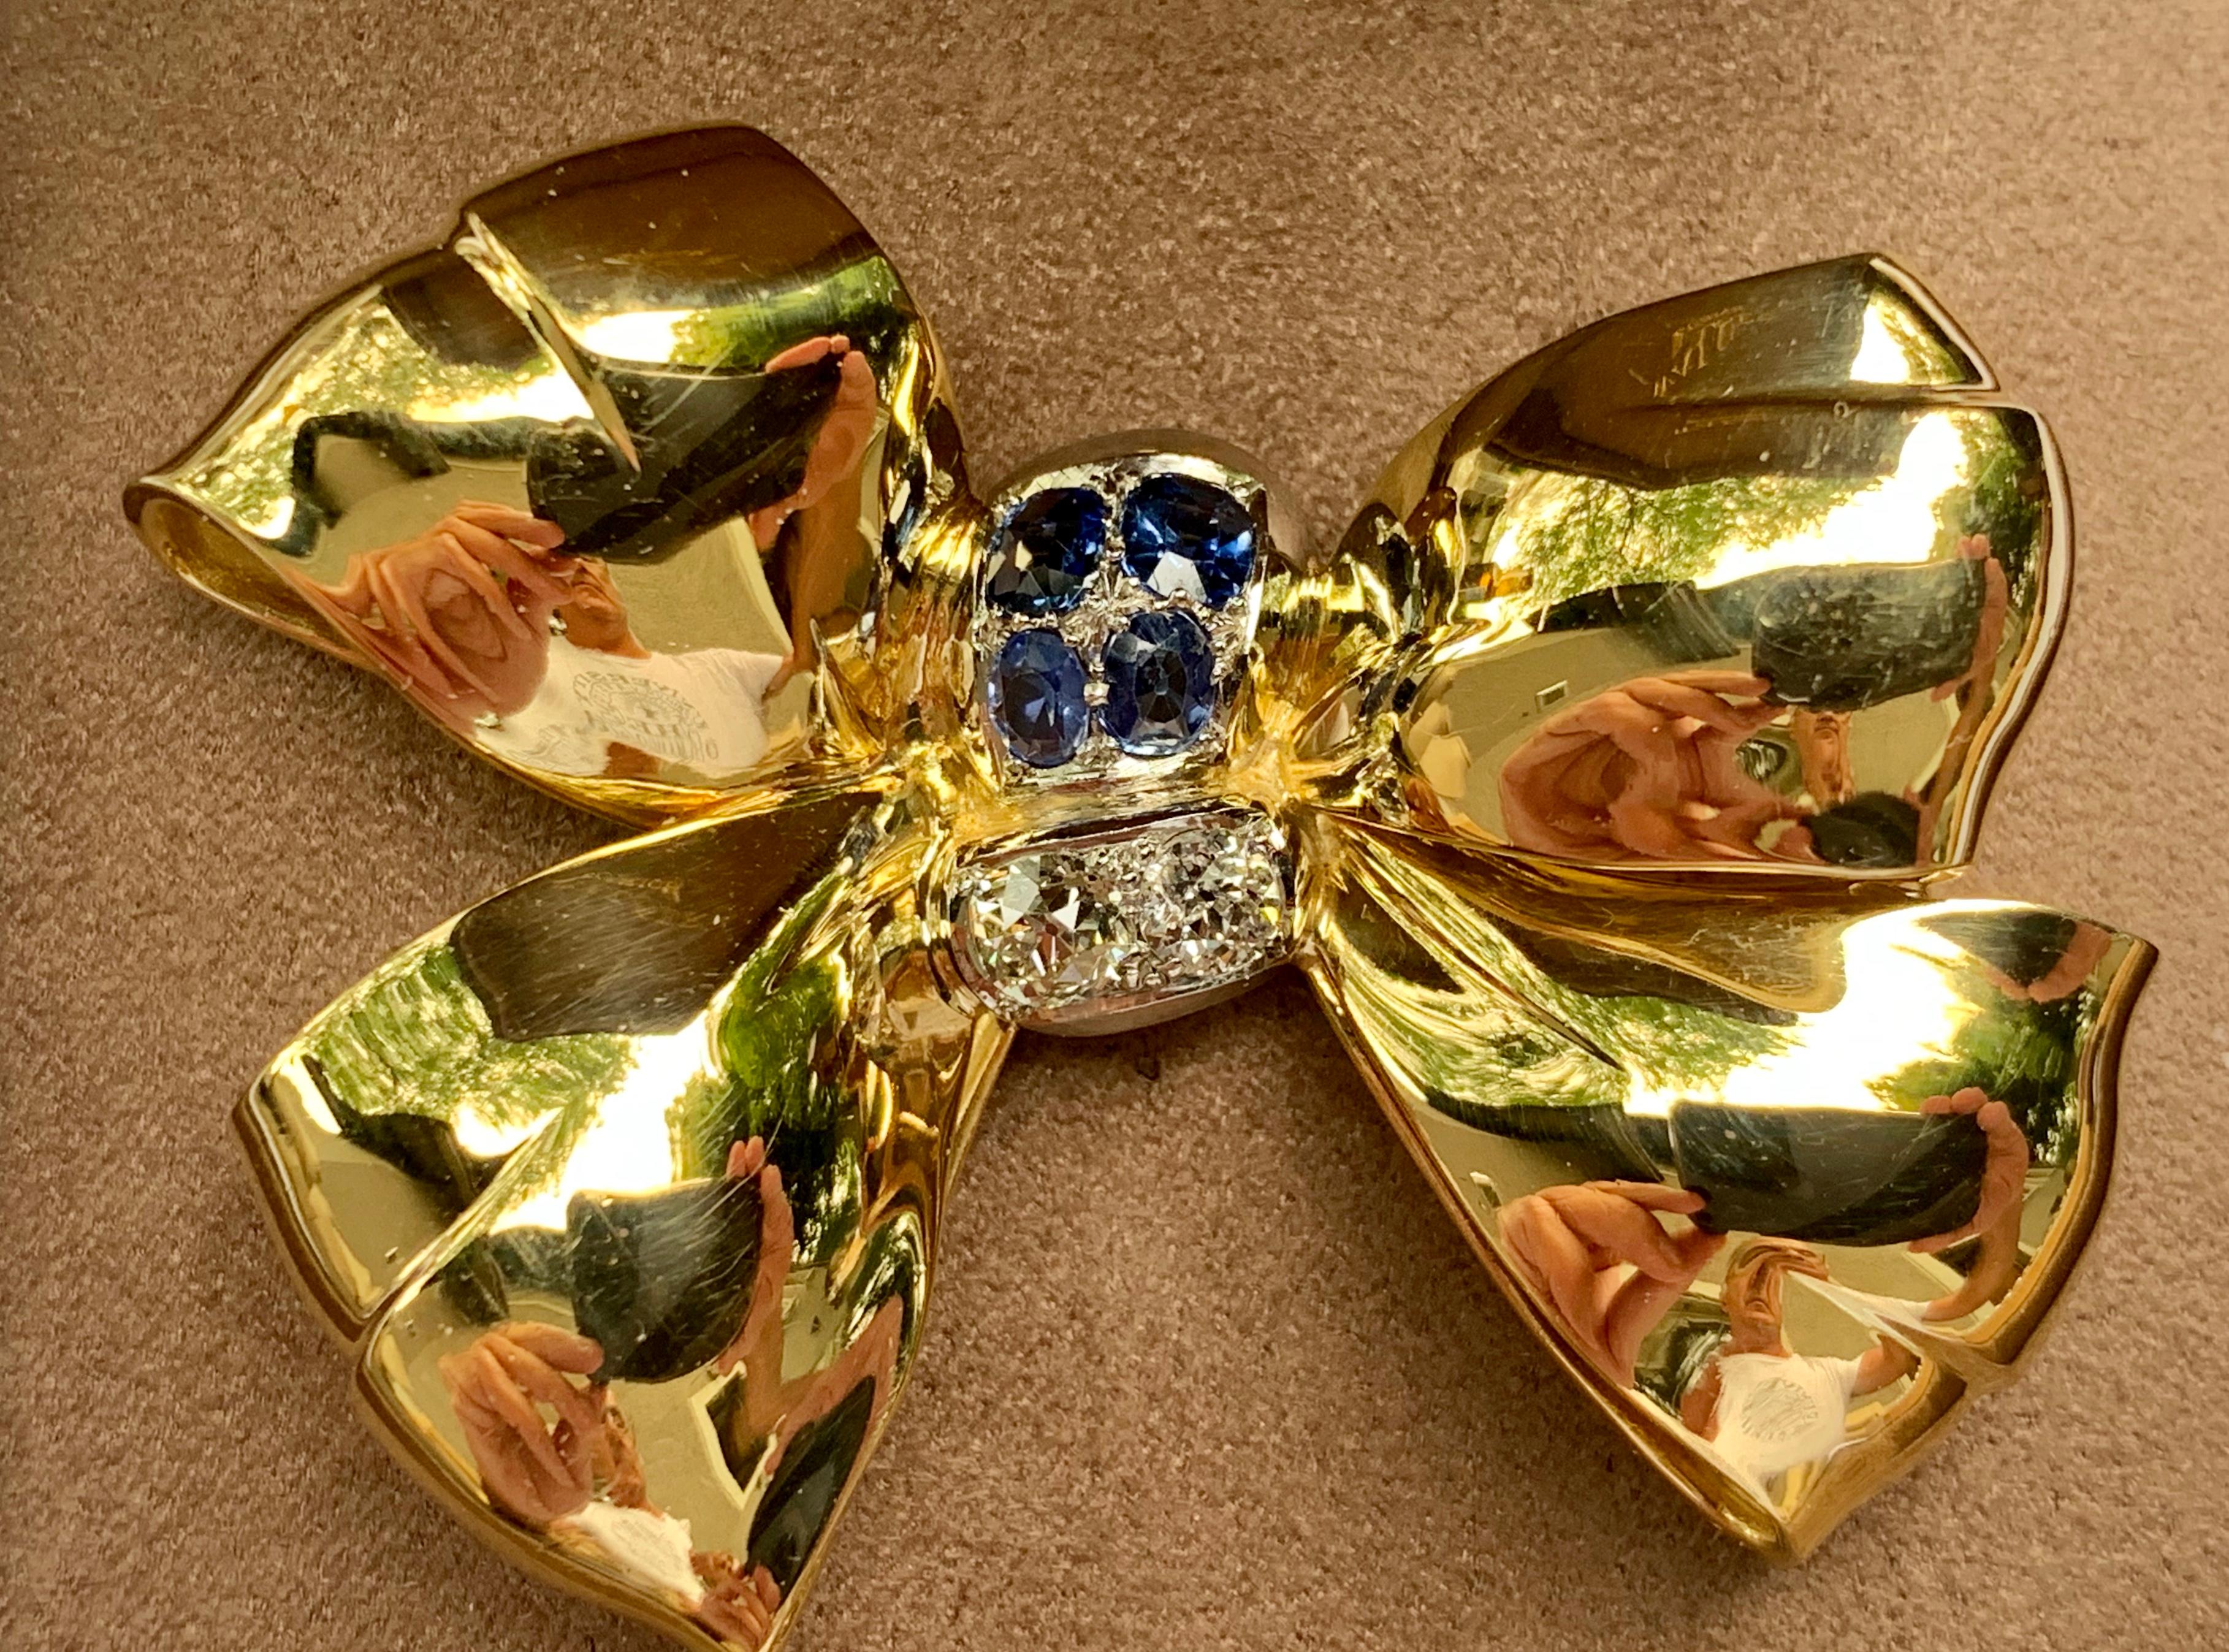 Elegant 18 K yellow and white Gold Vintage bow brooch with natural Sapphires and Diamonds. The brooch is  quintessentially Retro in design. 4 Ceylon Sapphires weighing approximately 1 ct and 2 old European cut Diamonds weighing approximately 0.90